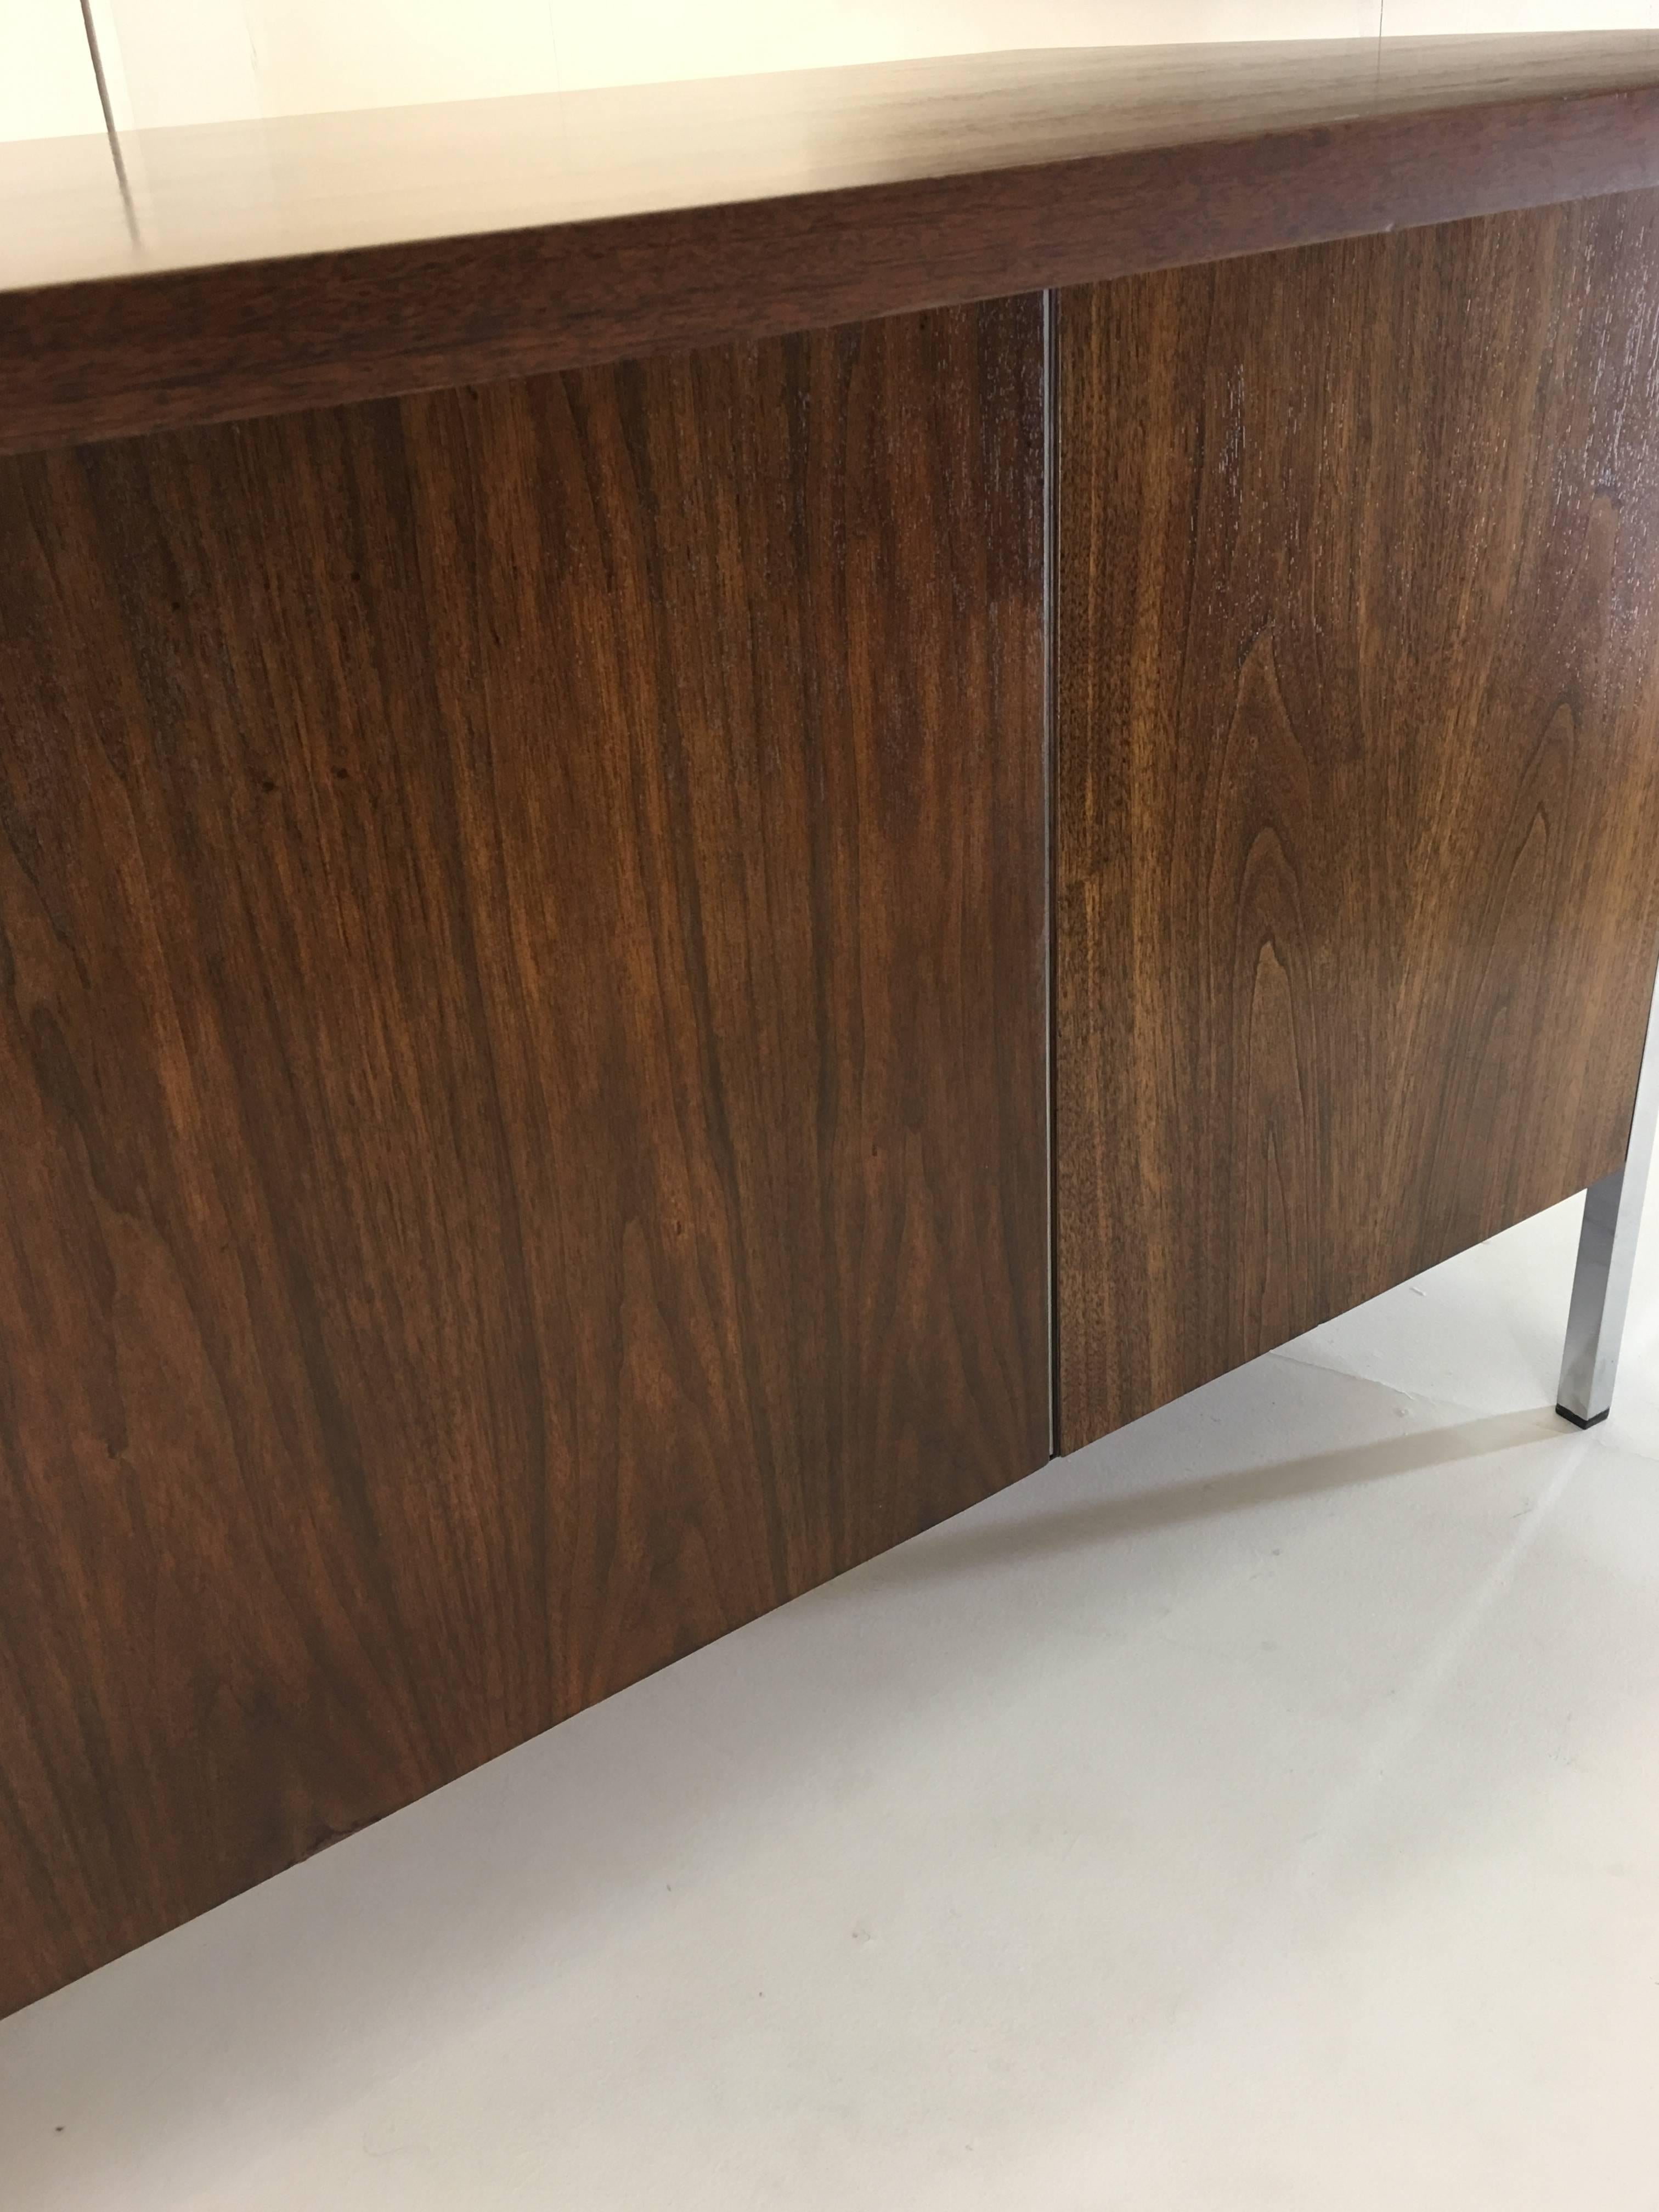 North American  Exquisite 1952 Walnut Executive Desk by Florence Knoll for Knoll Associates